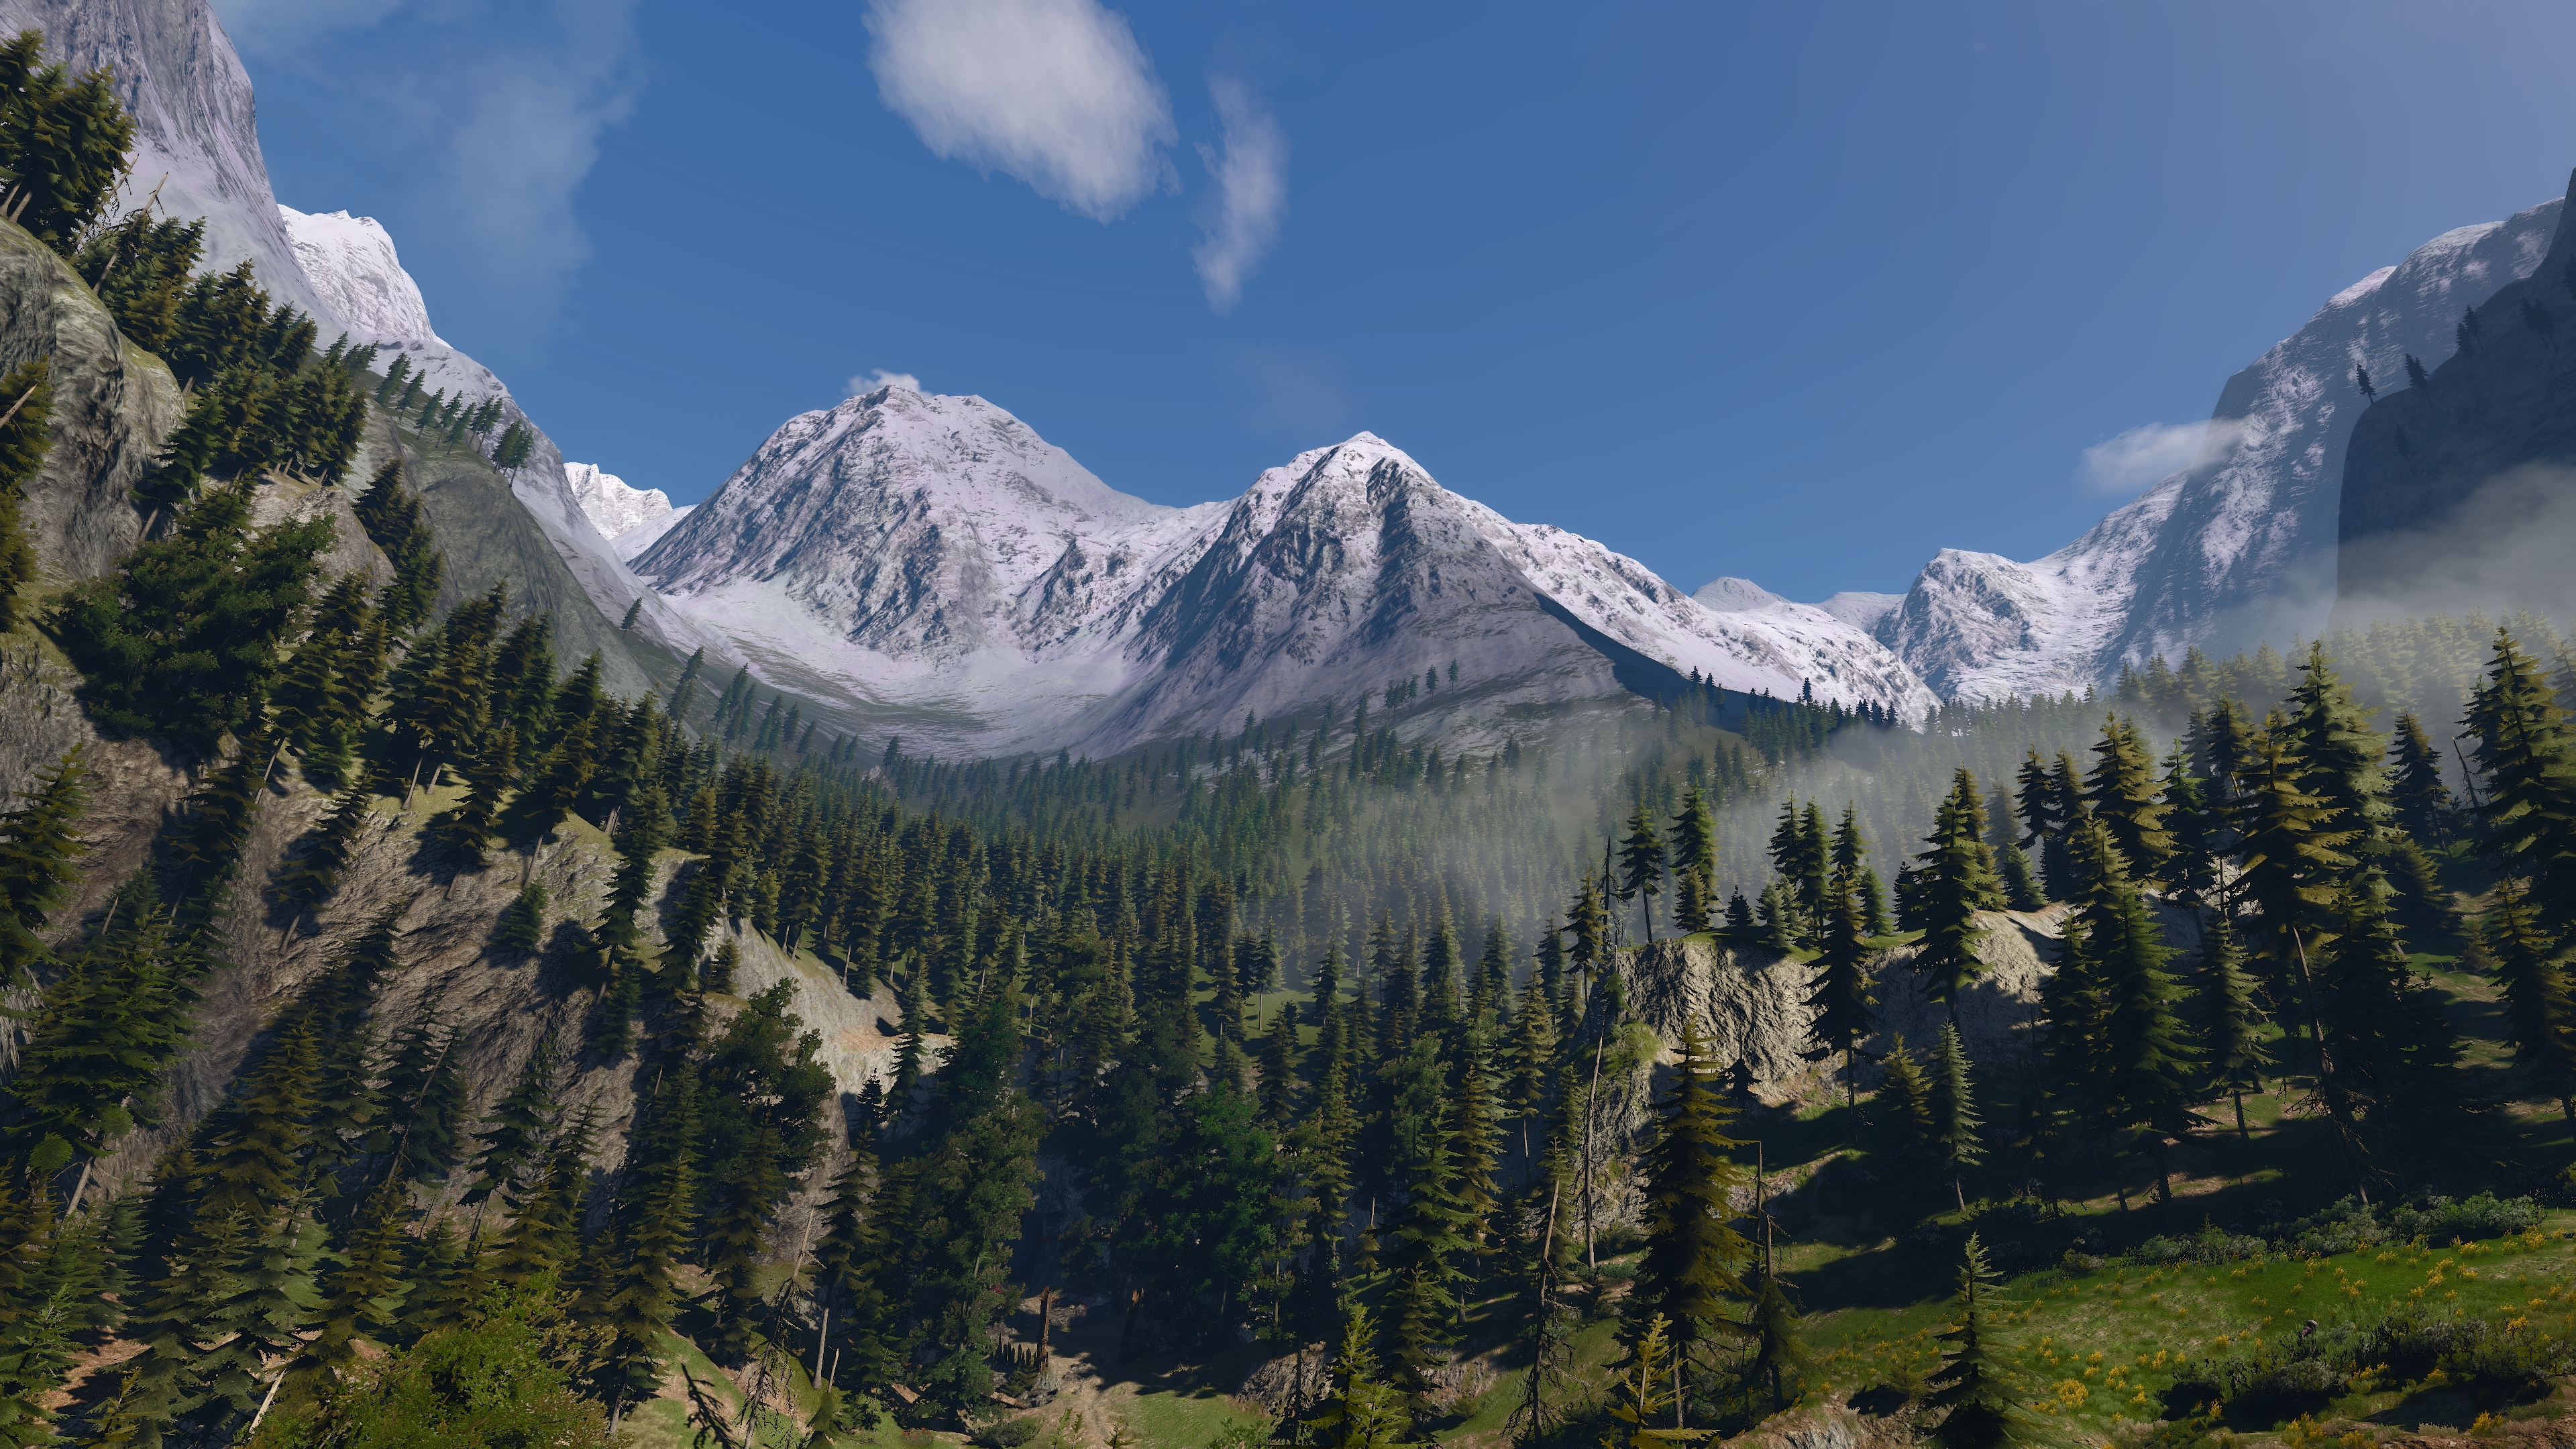 General 3840x2160 The Witcher 3: Wild Hunt screen shot PC gaming mountains Kaer Morhen video game art trees video games sunlight forest mist CGI sky clear sky snow snowy mountain